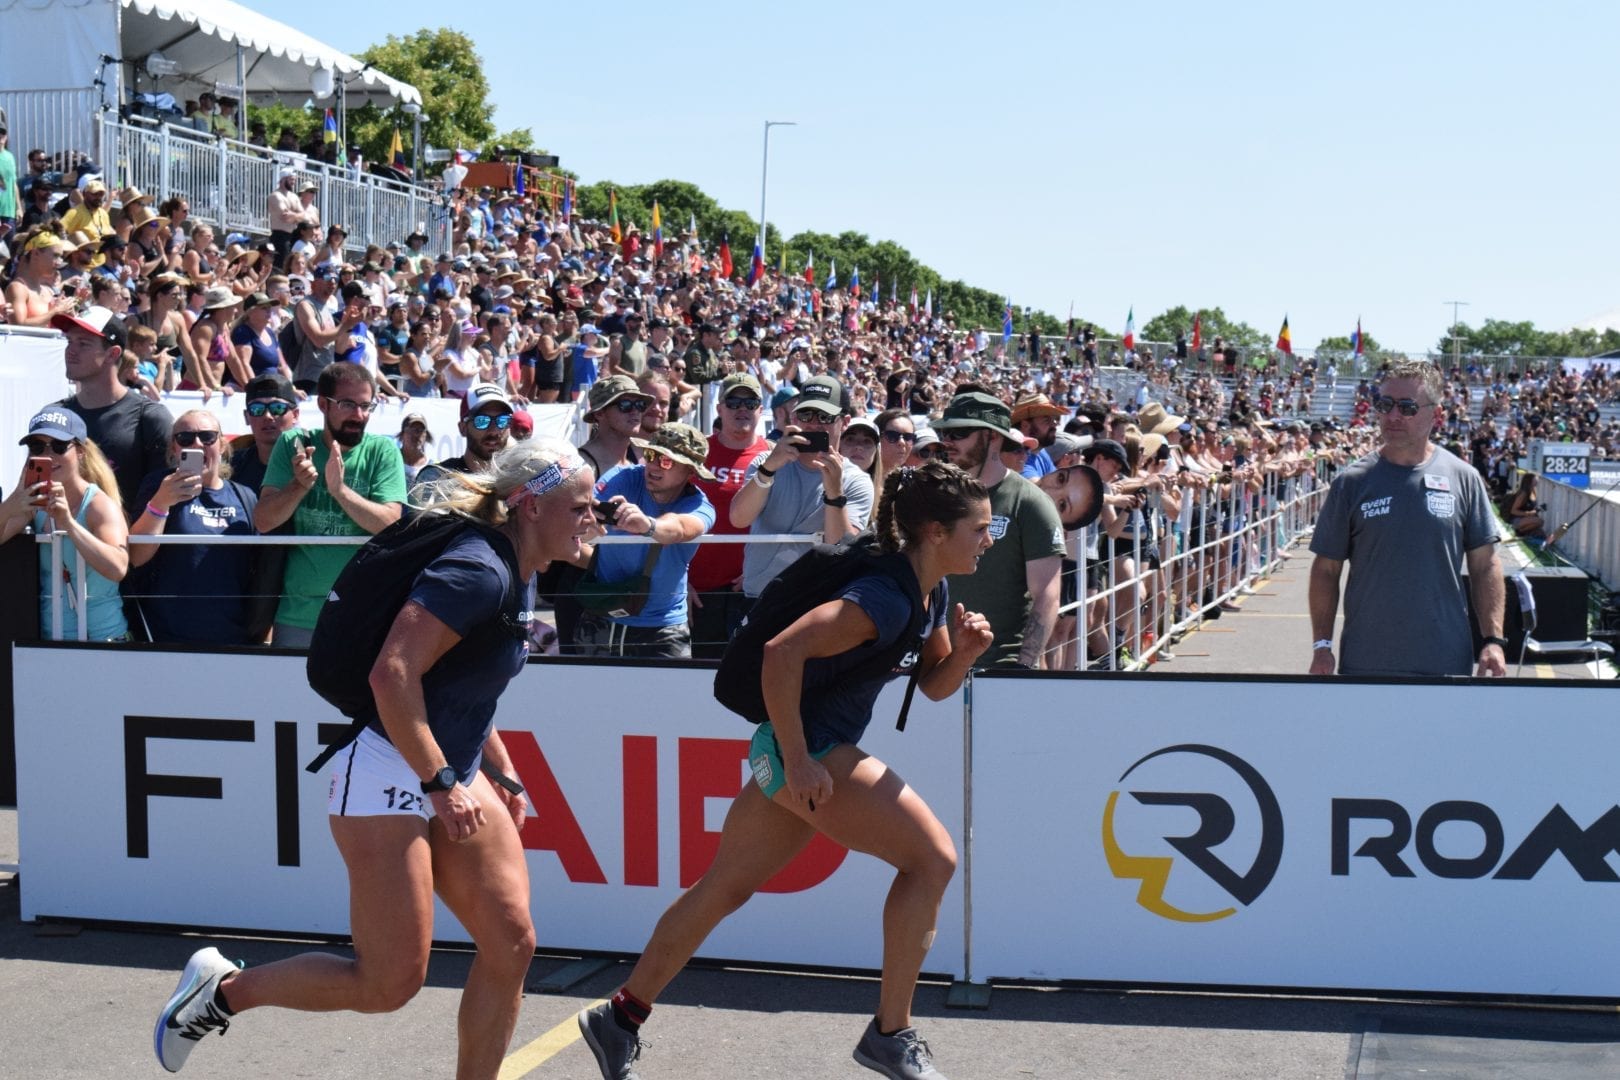 Sara Sigmundsdottir completes the Ruck Run event at the 2019 CrossFit Games.